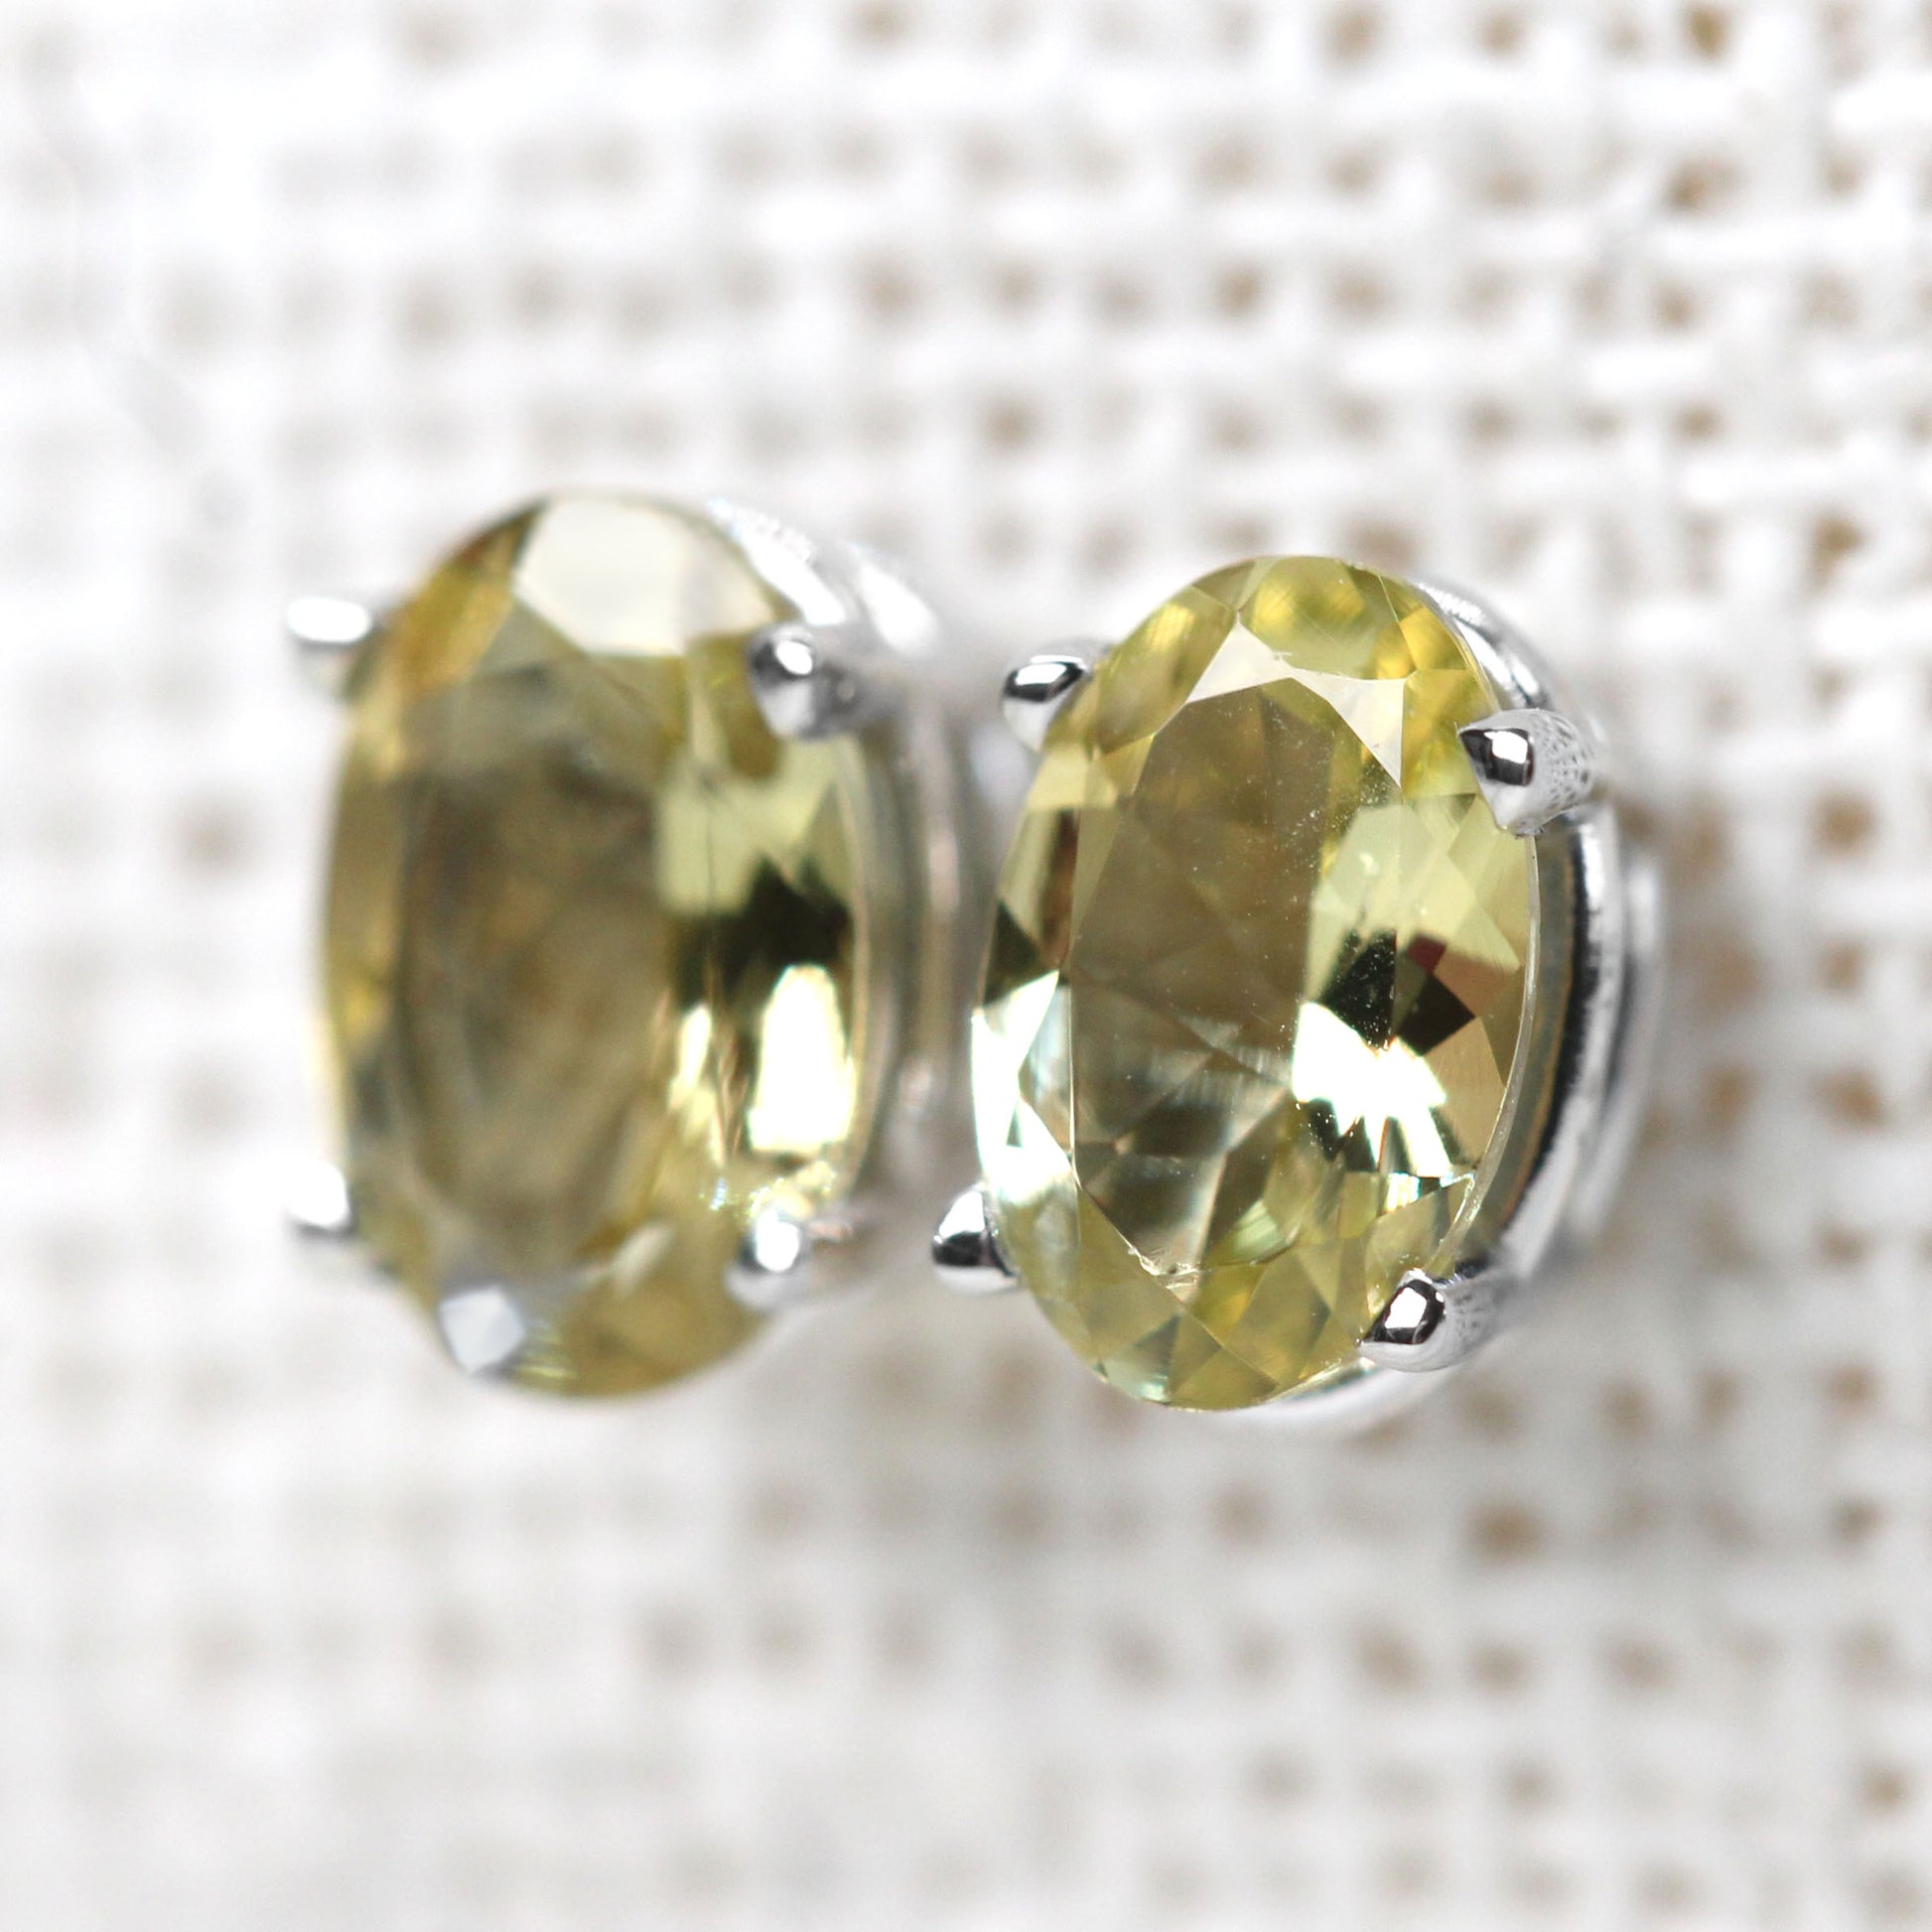 Golden Yellow Oval Sapphire Earrings in 14k White Gold - Ready to Ship - Midwinter Co. Alternative Bridal Rings and Modern Fine Jewelry